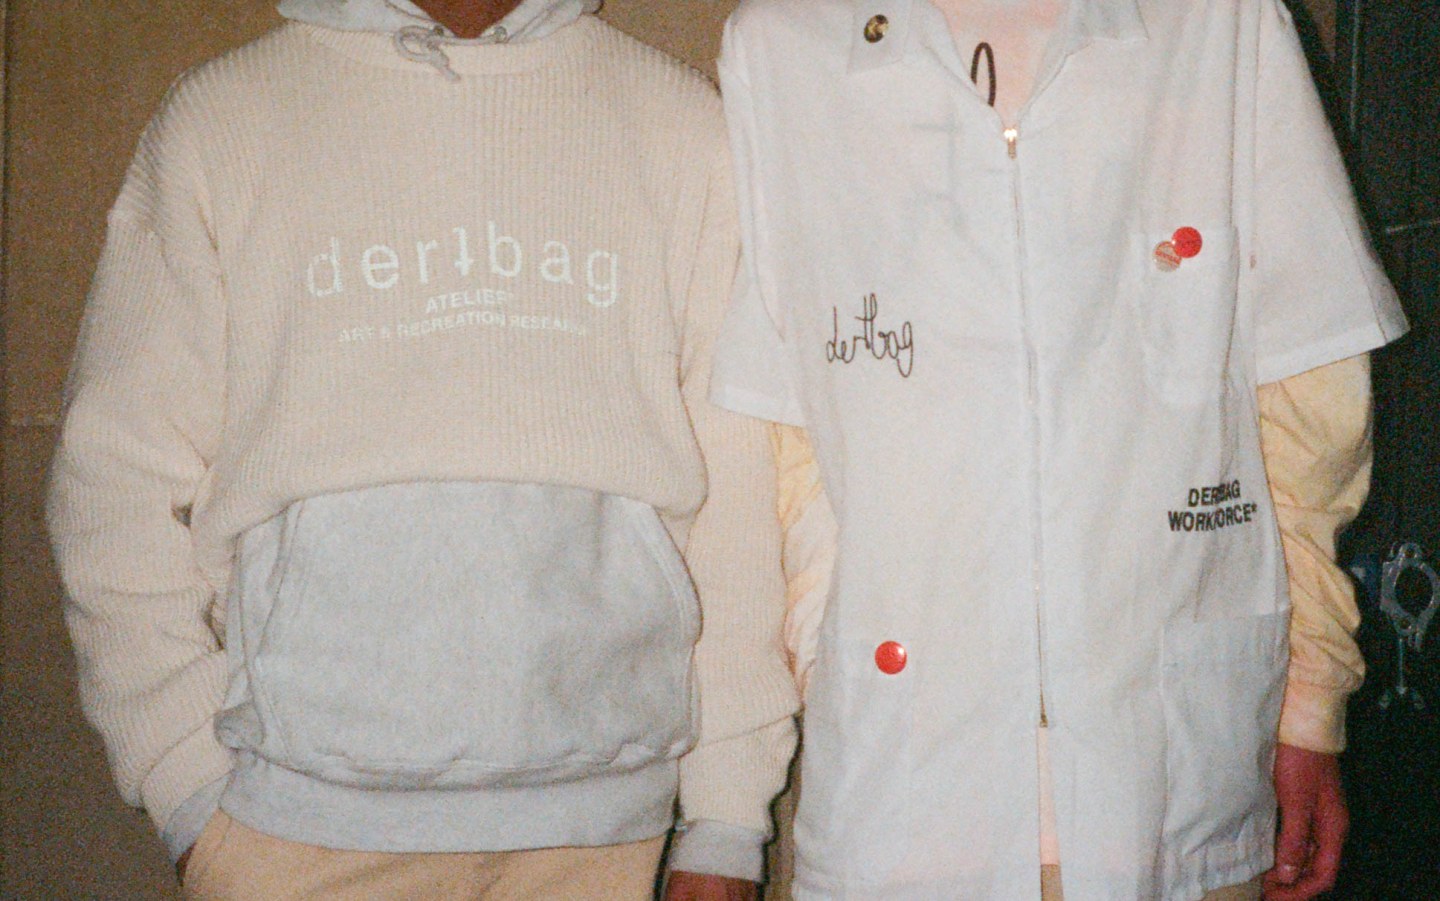 Philip Post reflects on a decade of Dertbag and its NYFW debut